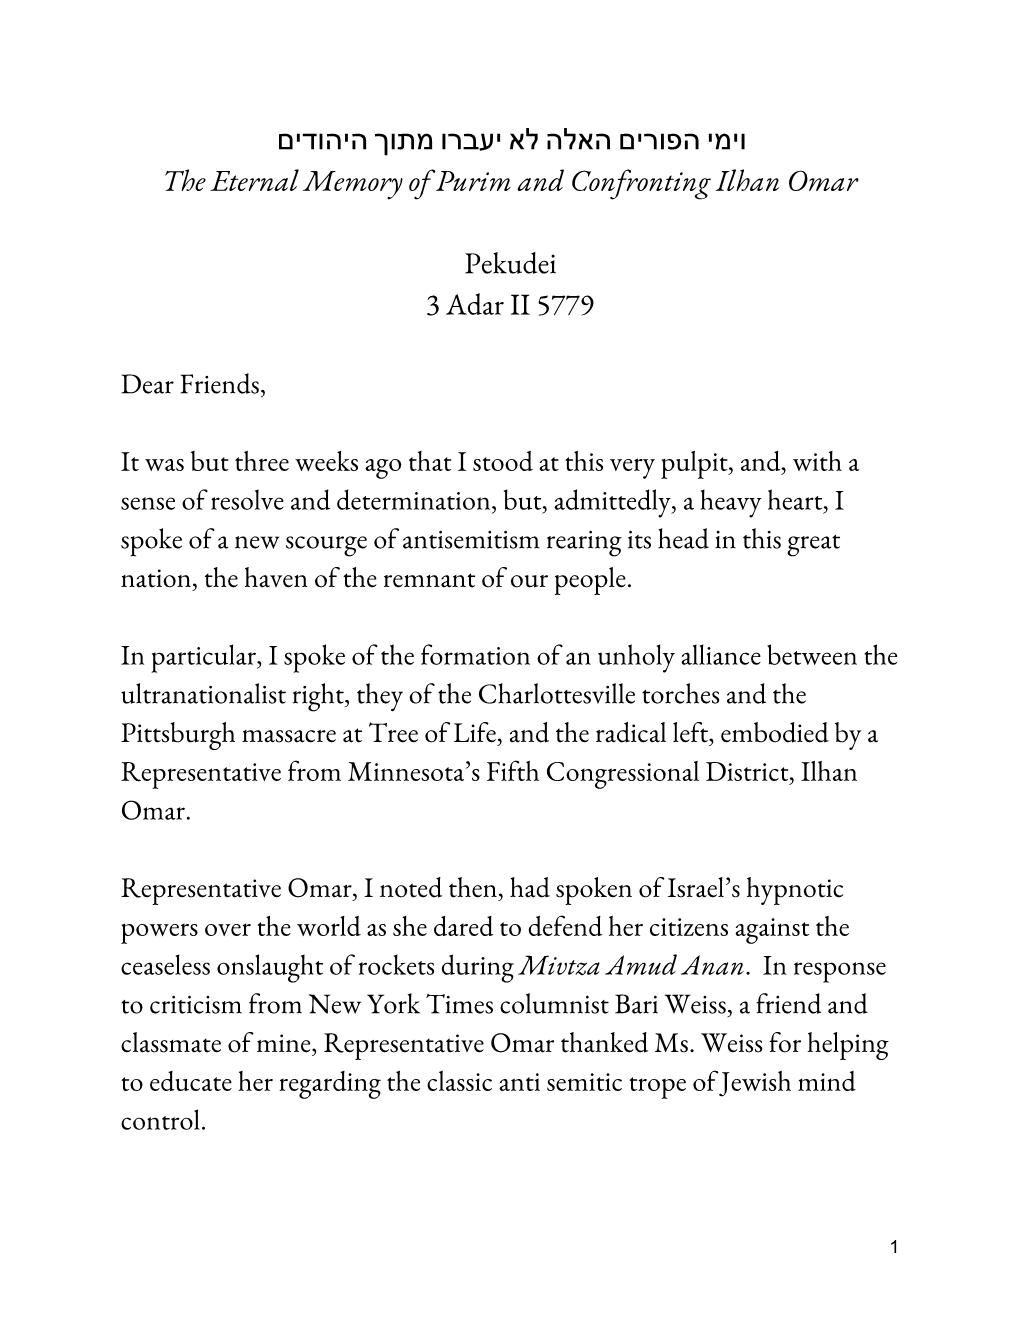 The Eternal Memory of Purim and Confronting Ilhan Omar